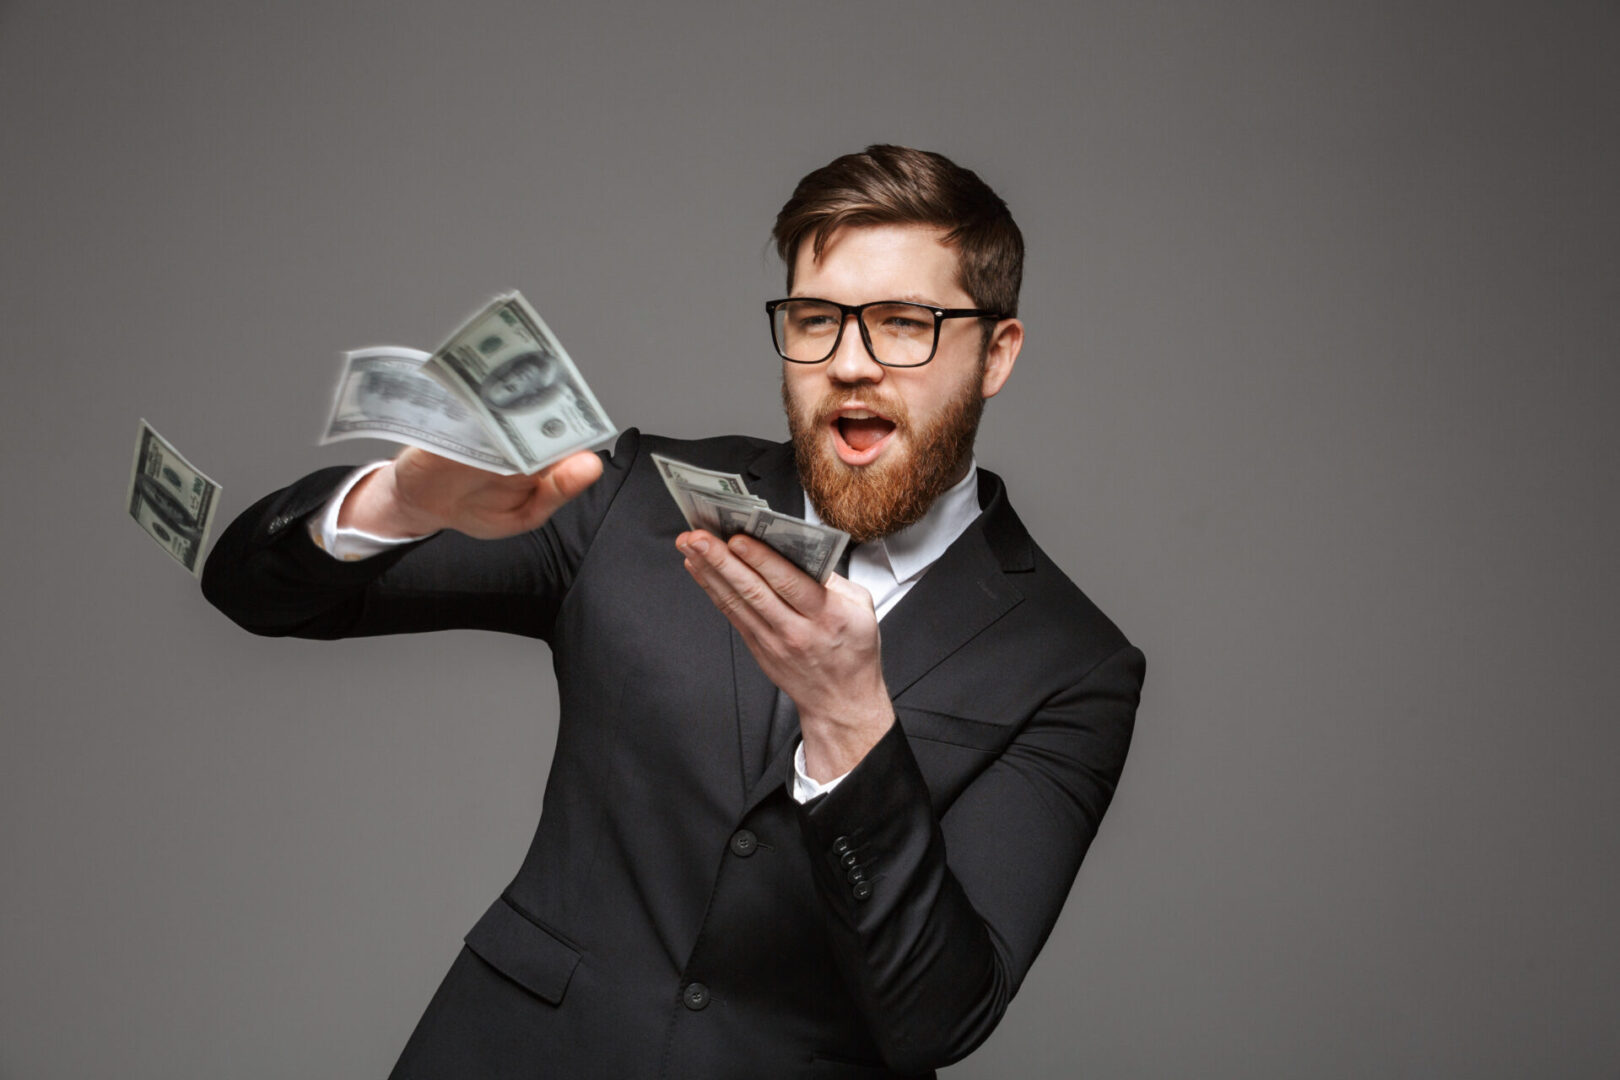 A man in a suit holding money and wearing glasses.